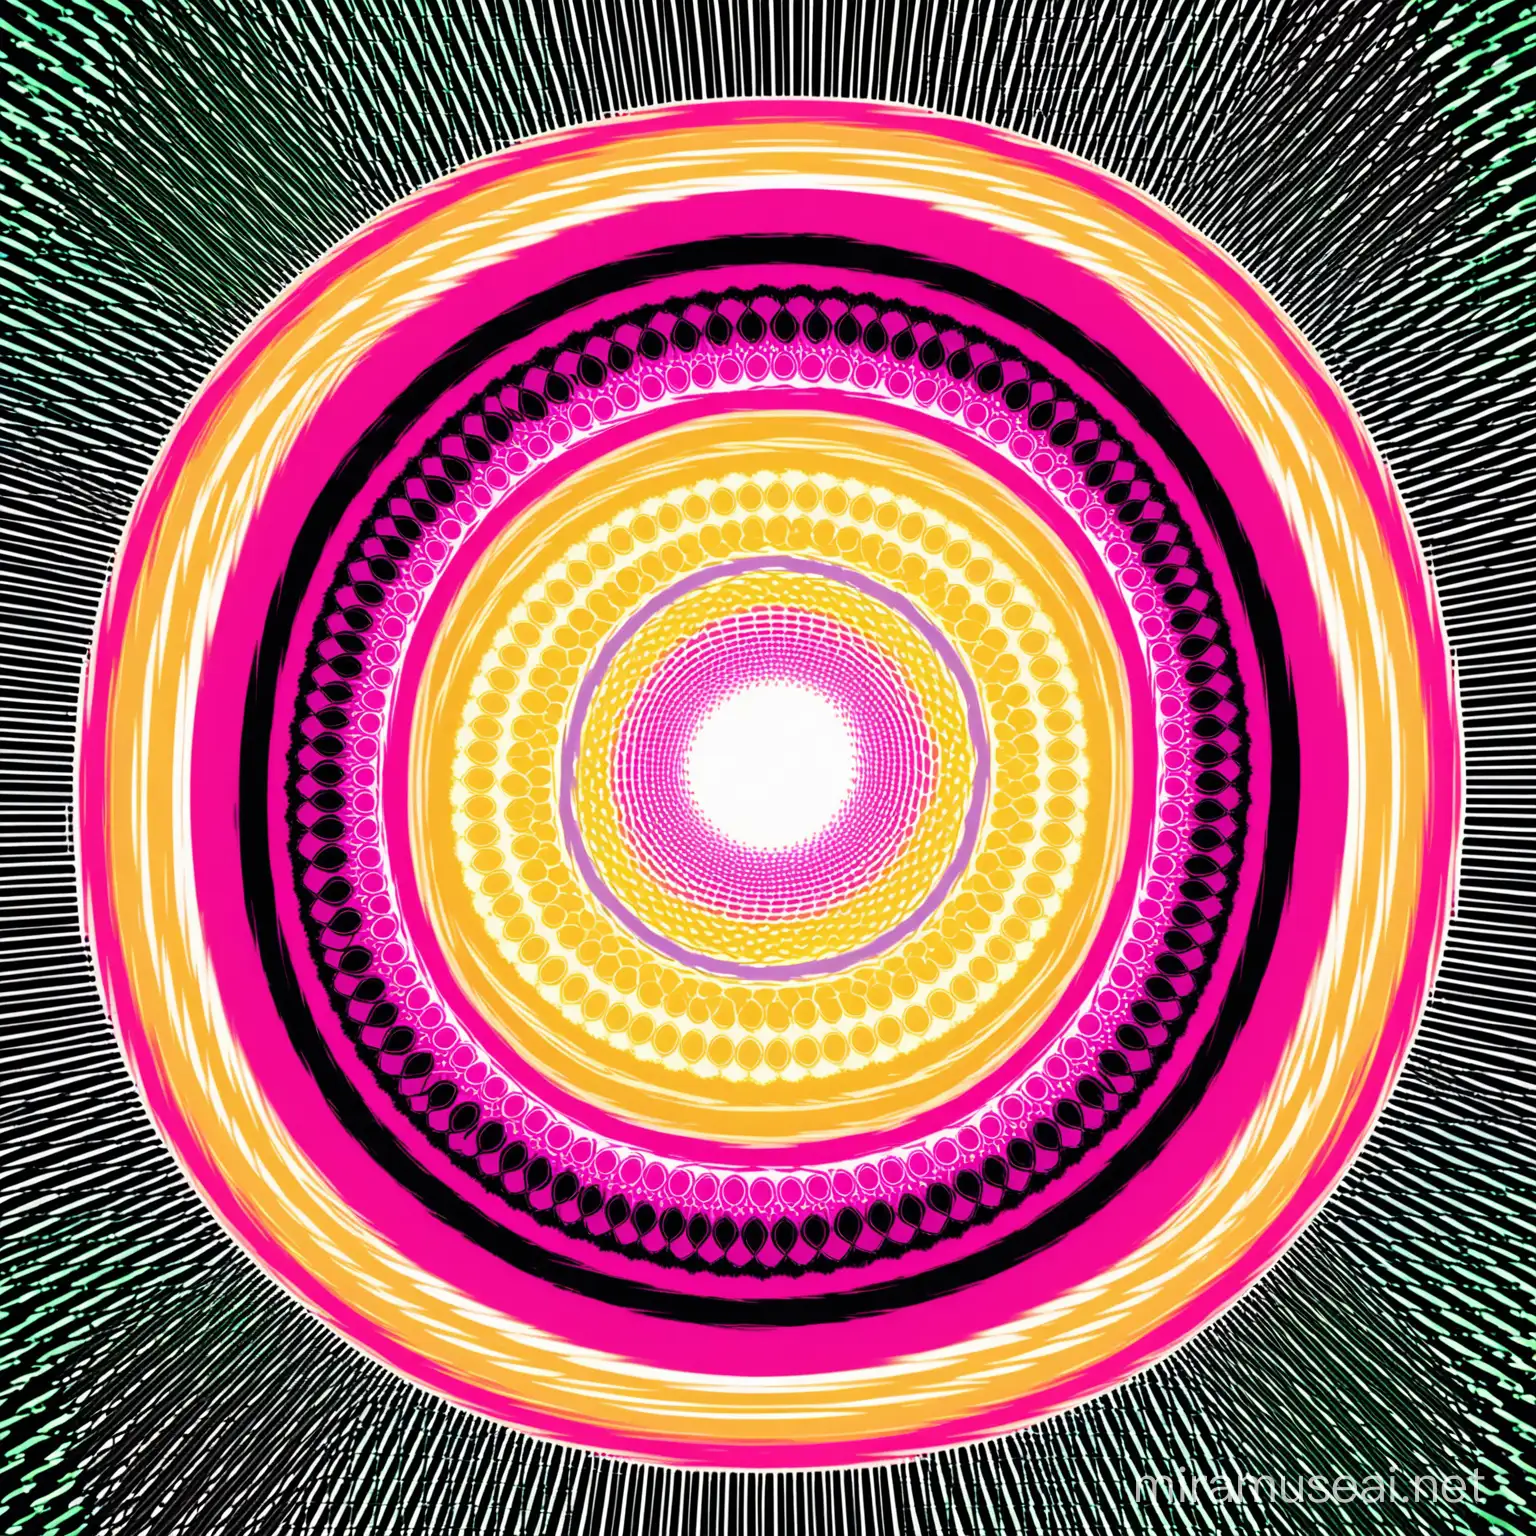 guava black and white clocks, psychedelic colors, golden ratio, foreground and background geometric patterns, psychic funk album art